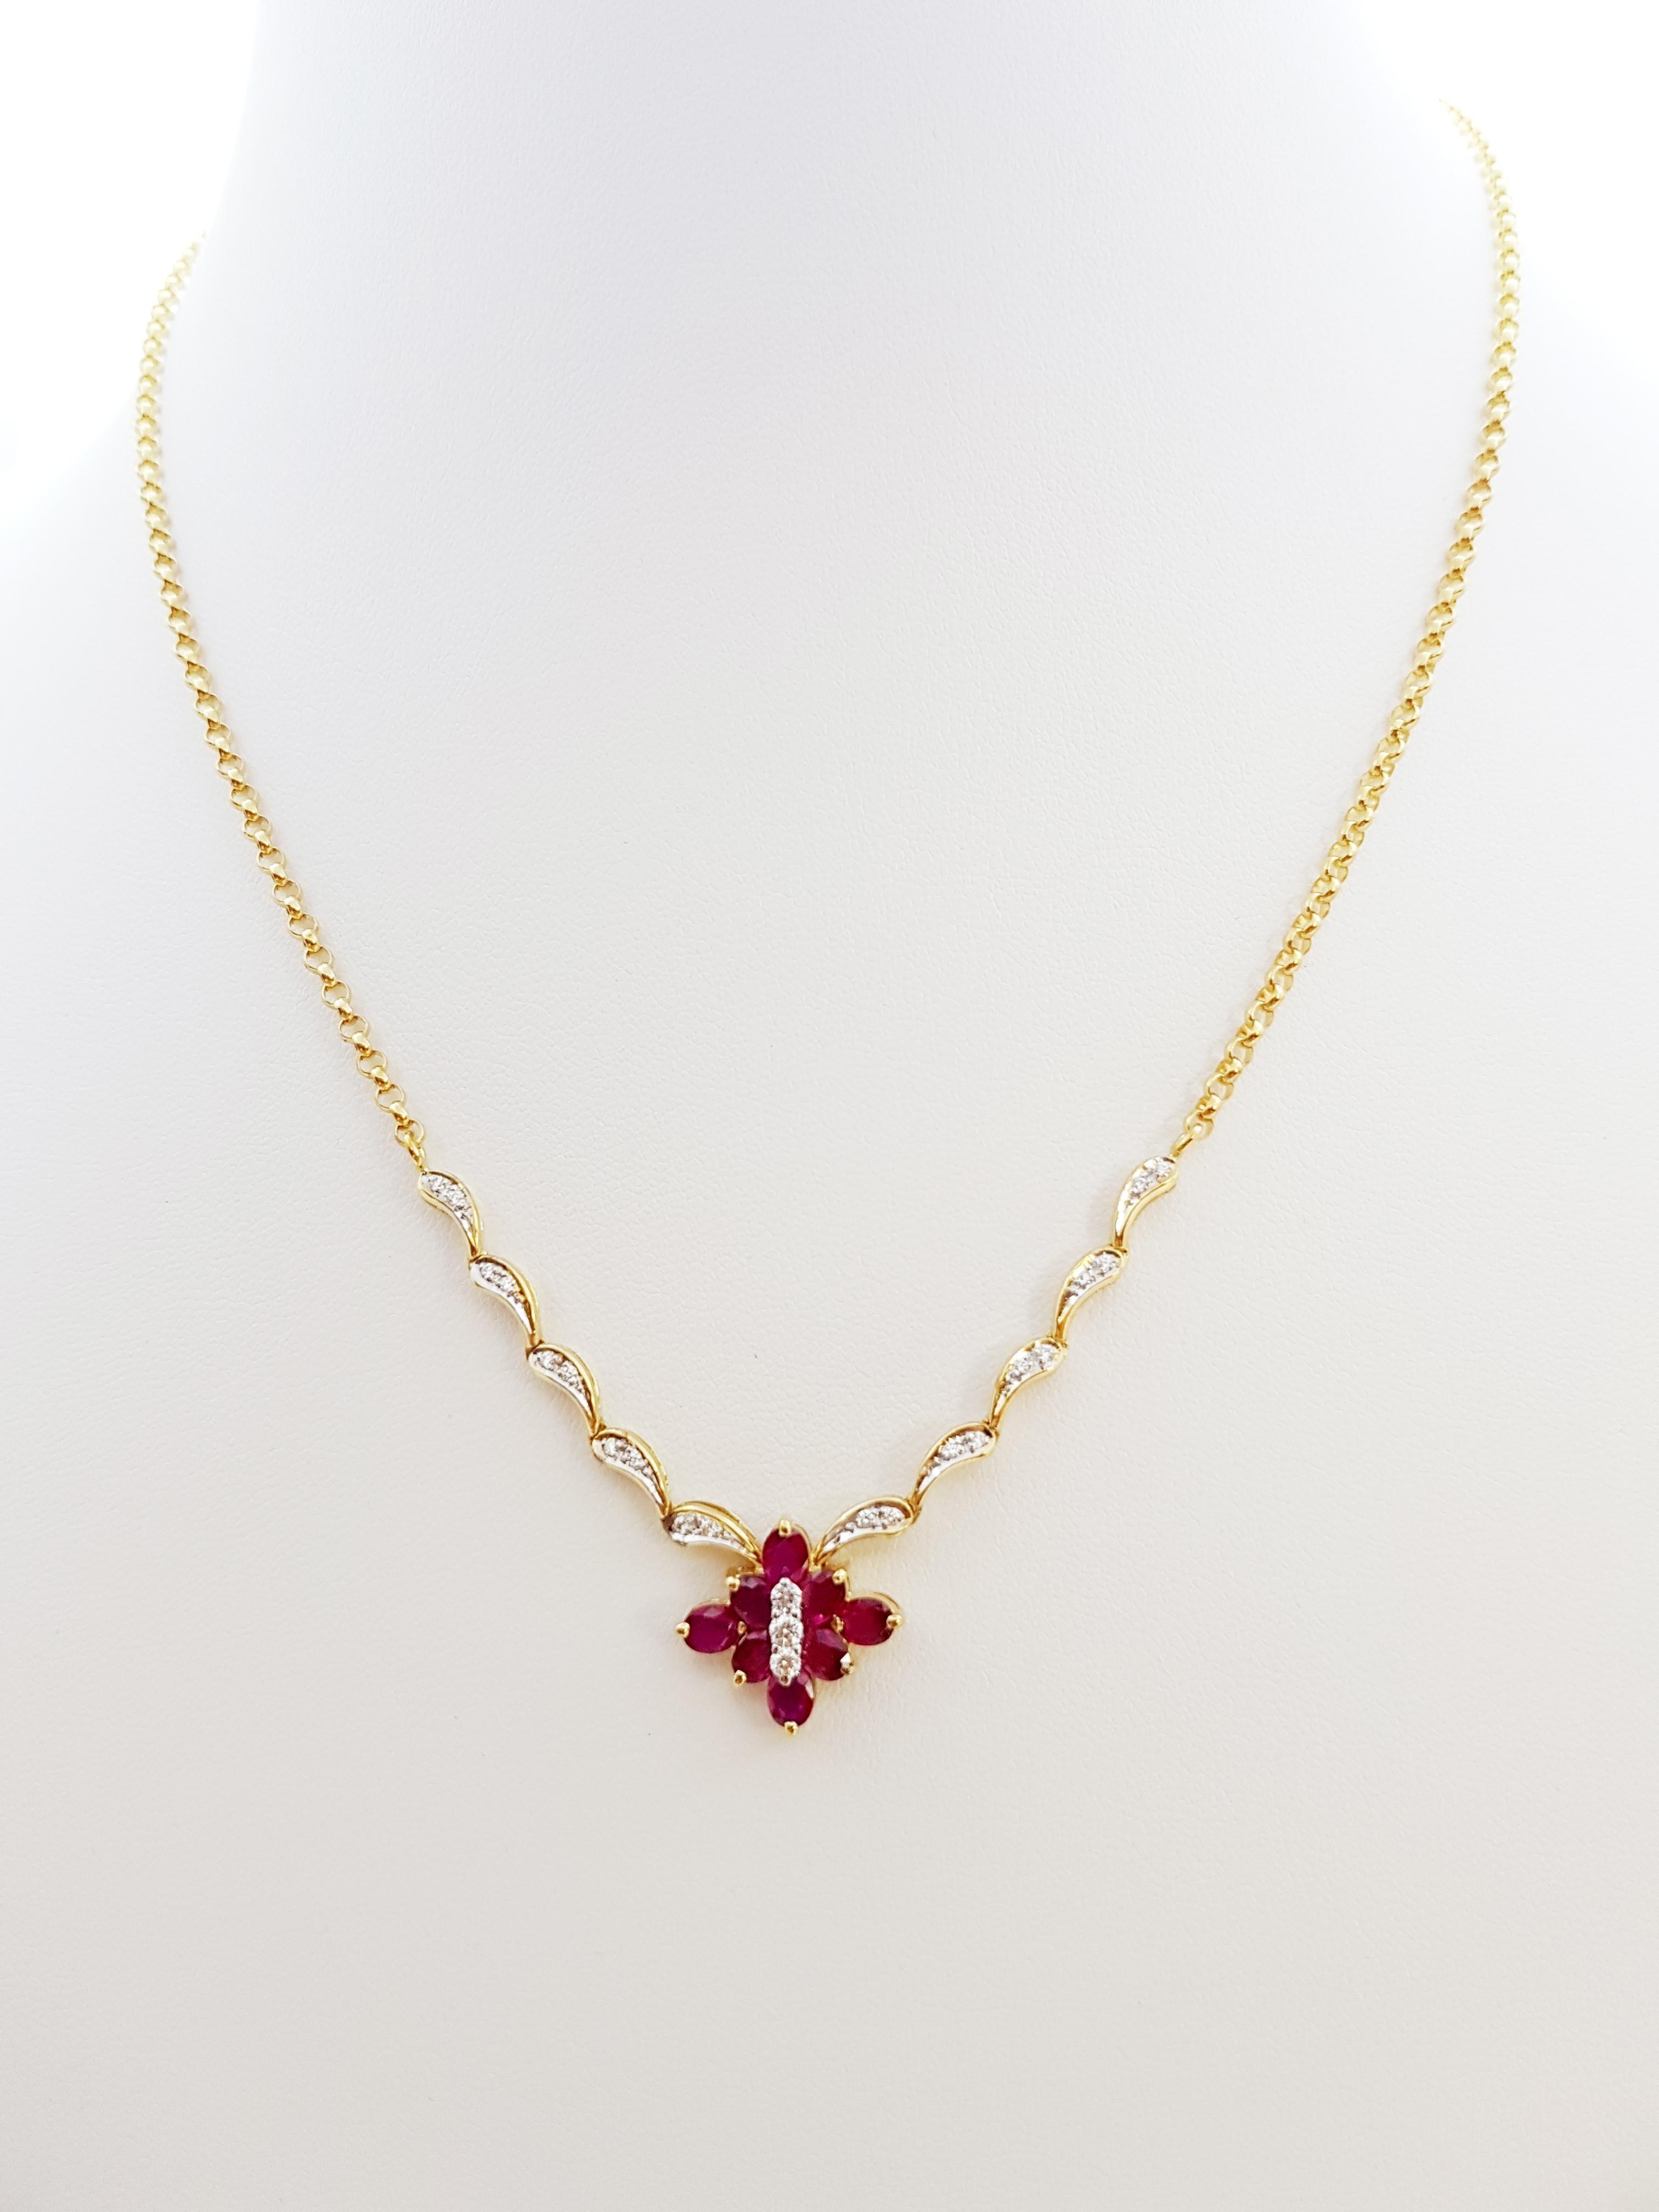 Ruby 1.77 carats with Diamond 0.25 carat Necklace set in 18 Karat Gold Settings

Width: 1.5 cm 
Length: 48.0 cm
Total Weight: 11.71 grams

